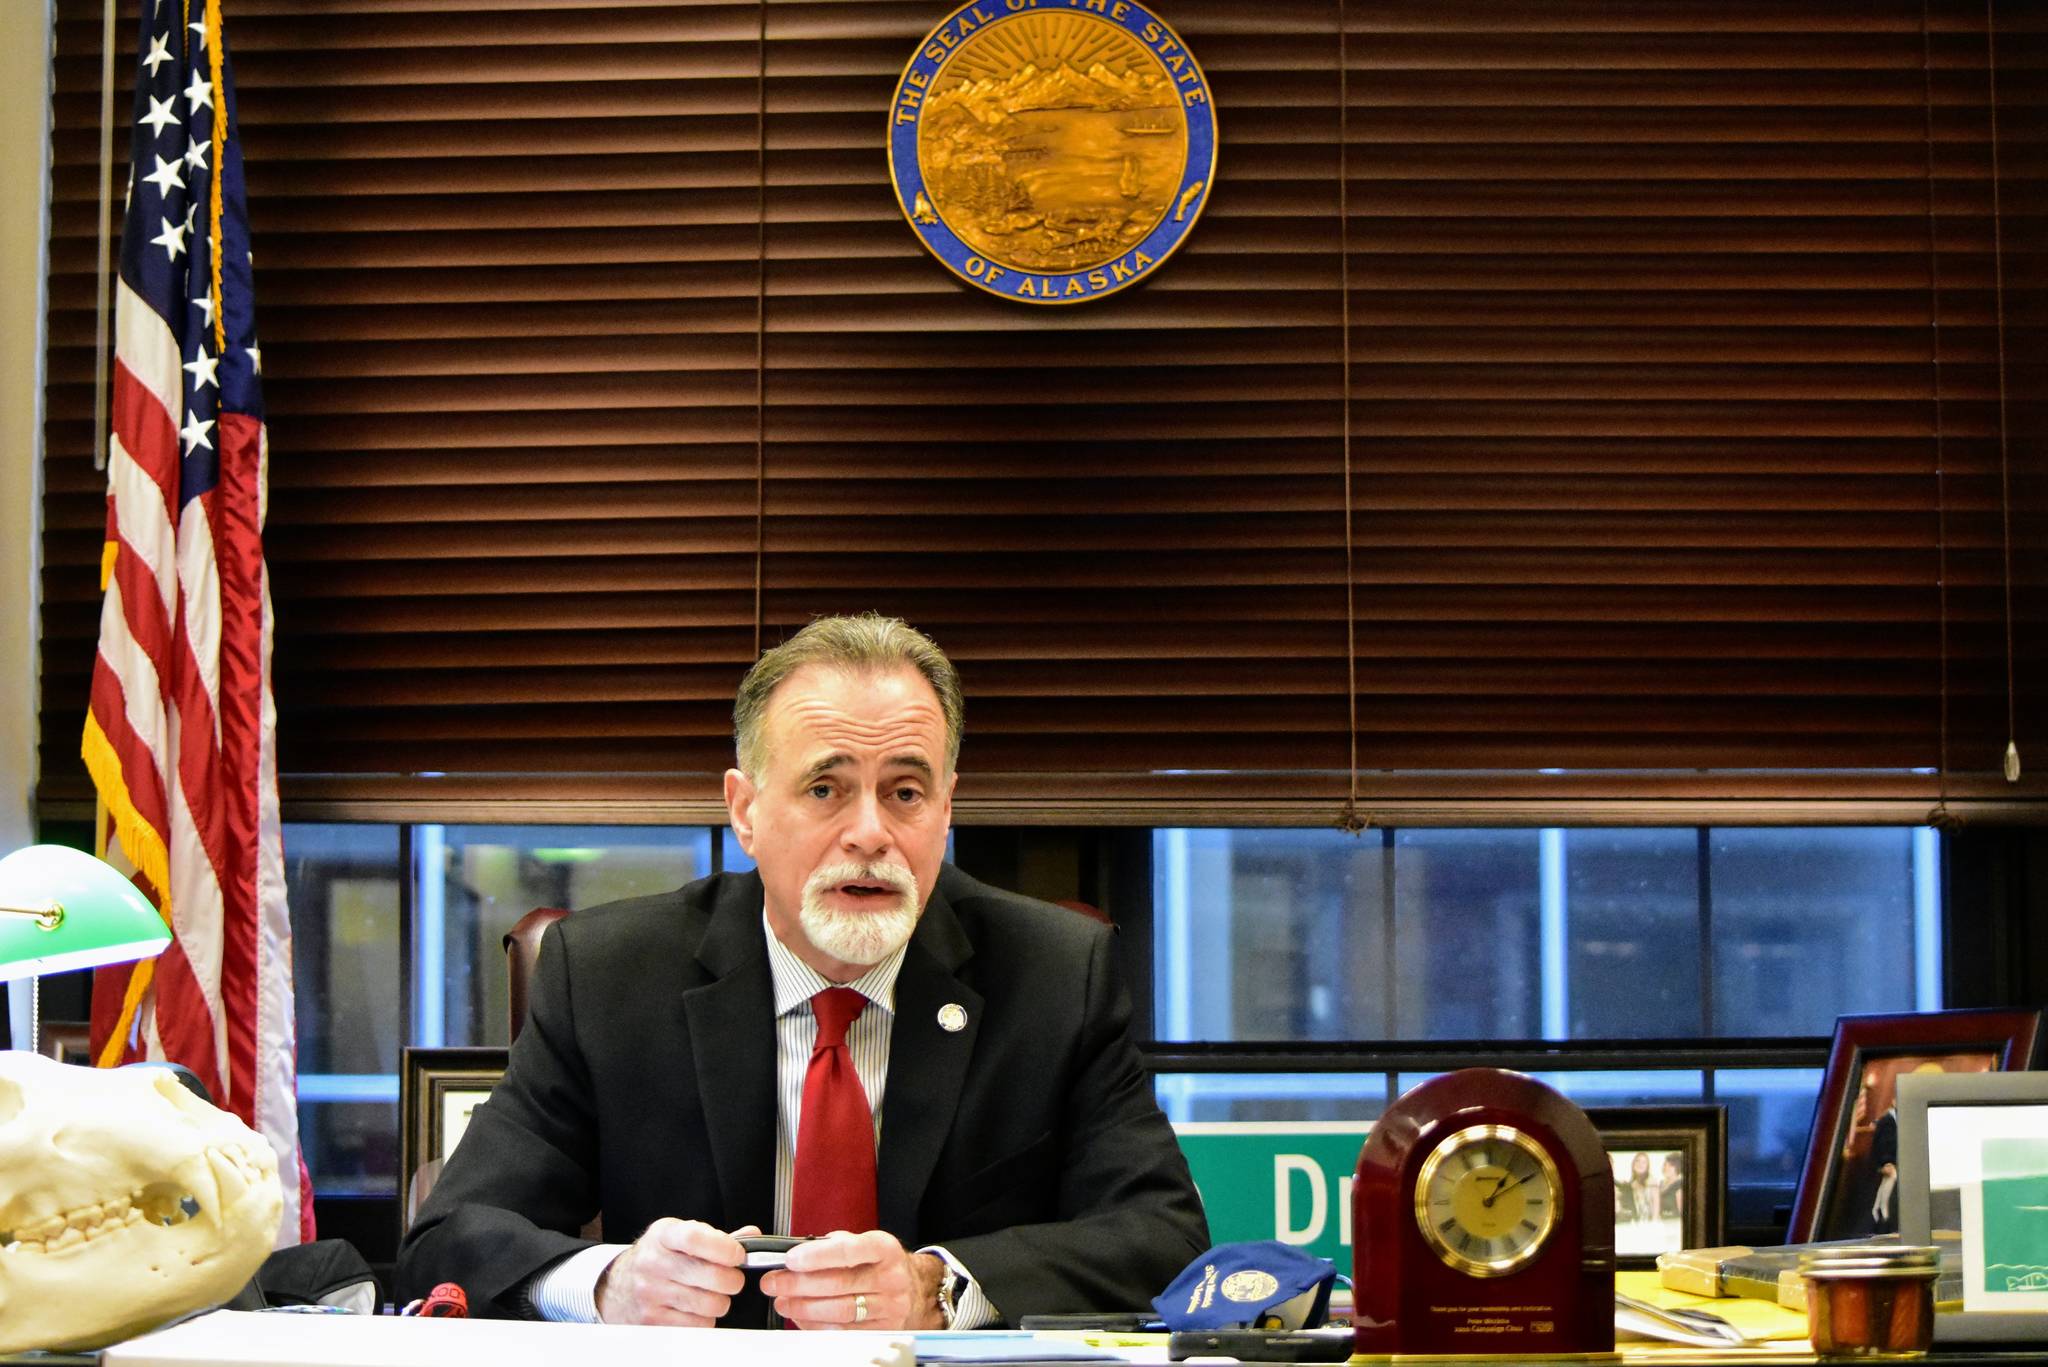 Senate President Peter Micciche, R-Soldotna, spoke with the Empire in his office at the Capitol on Friday, Jan. 22, 2021. He said he was hopeful about finding a path forward for the state and that he wanted better communication between the Legislature and the public. (Peter Segall / Juneau Empire)